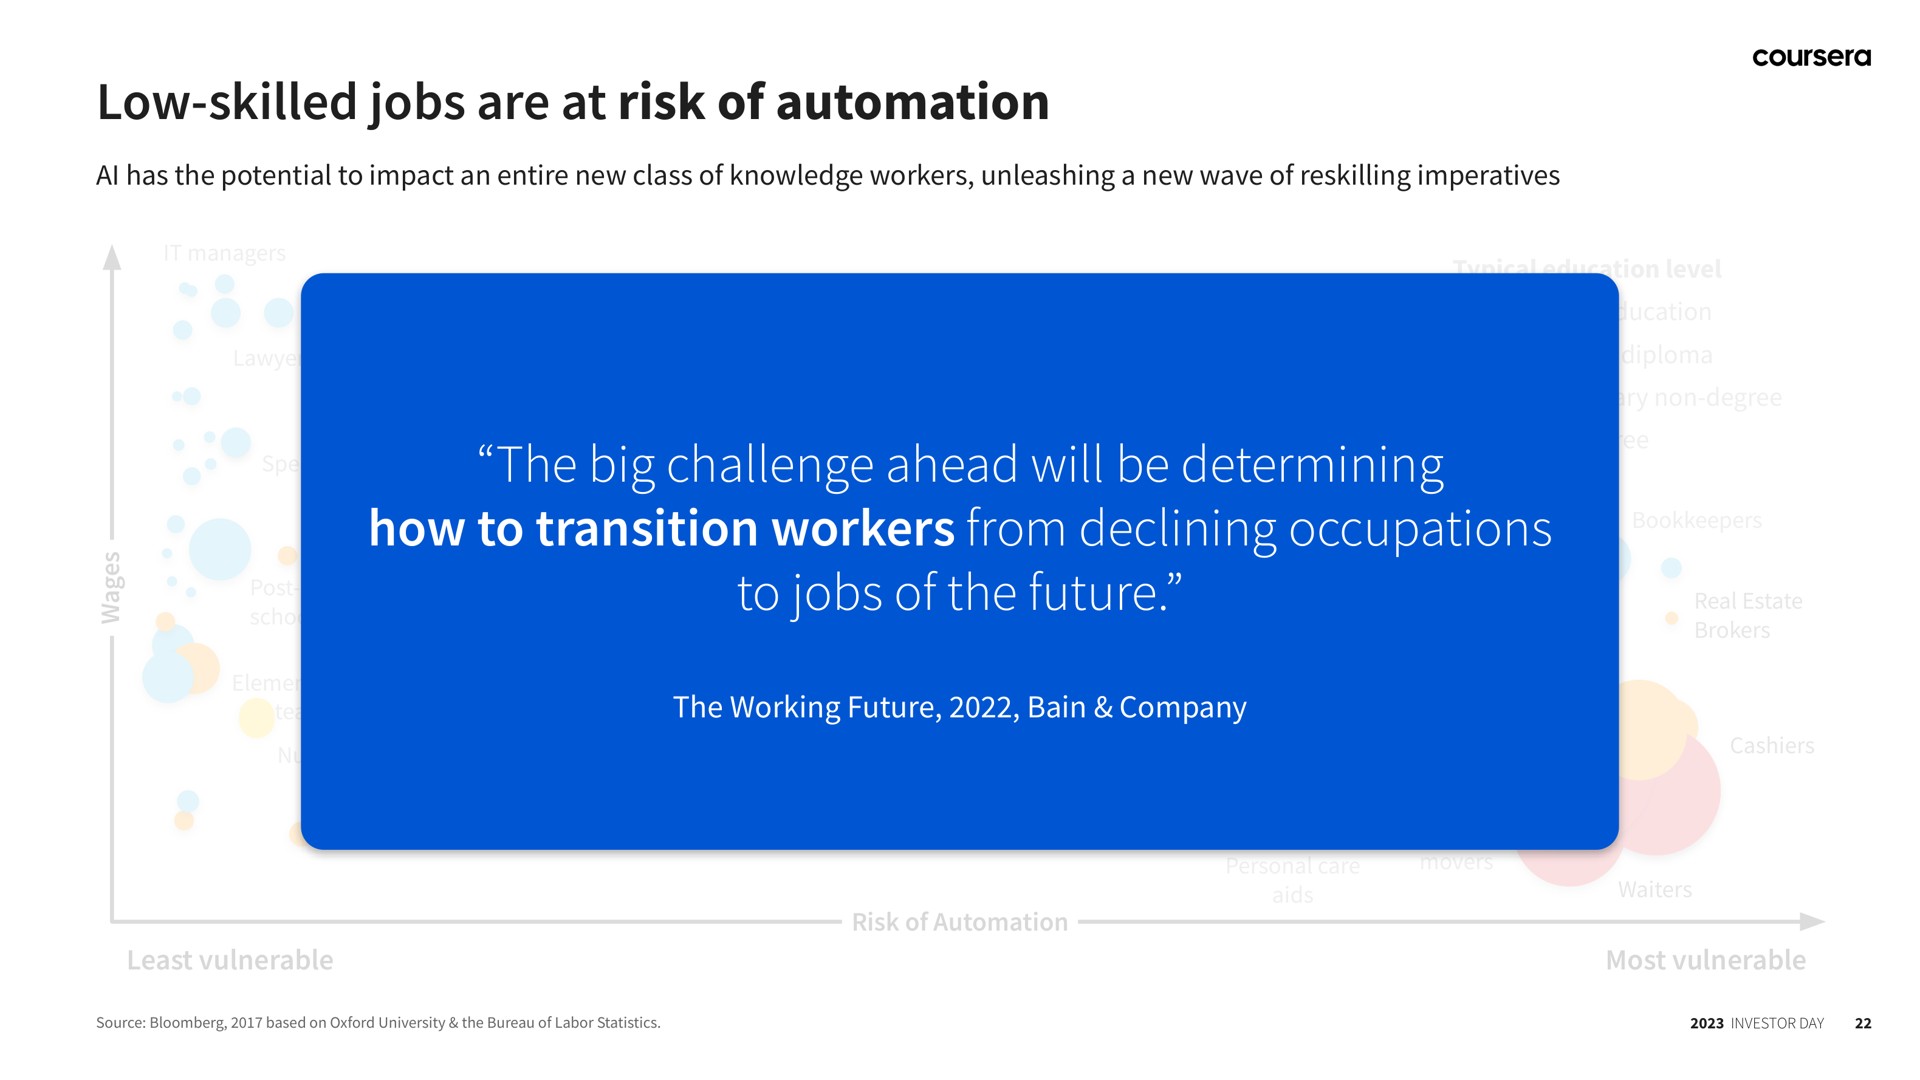 low skilled jobs are at risk of the big challenge ahead will be determining how to transition workers from declining occupations to jobs of the future | Coursera